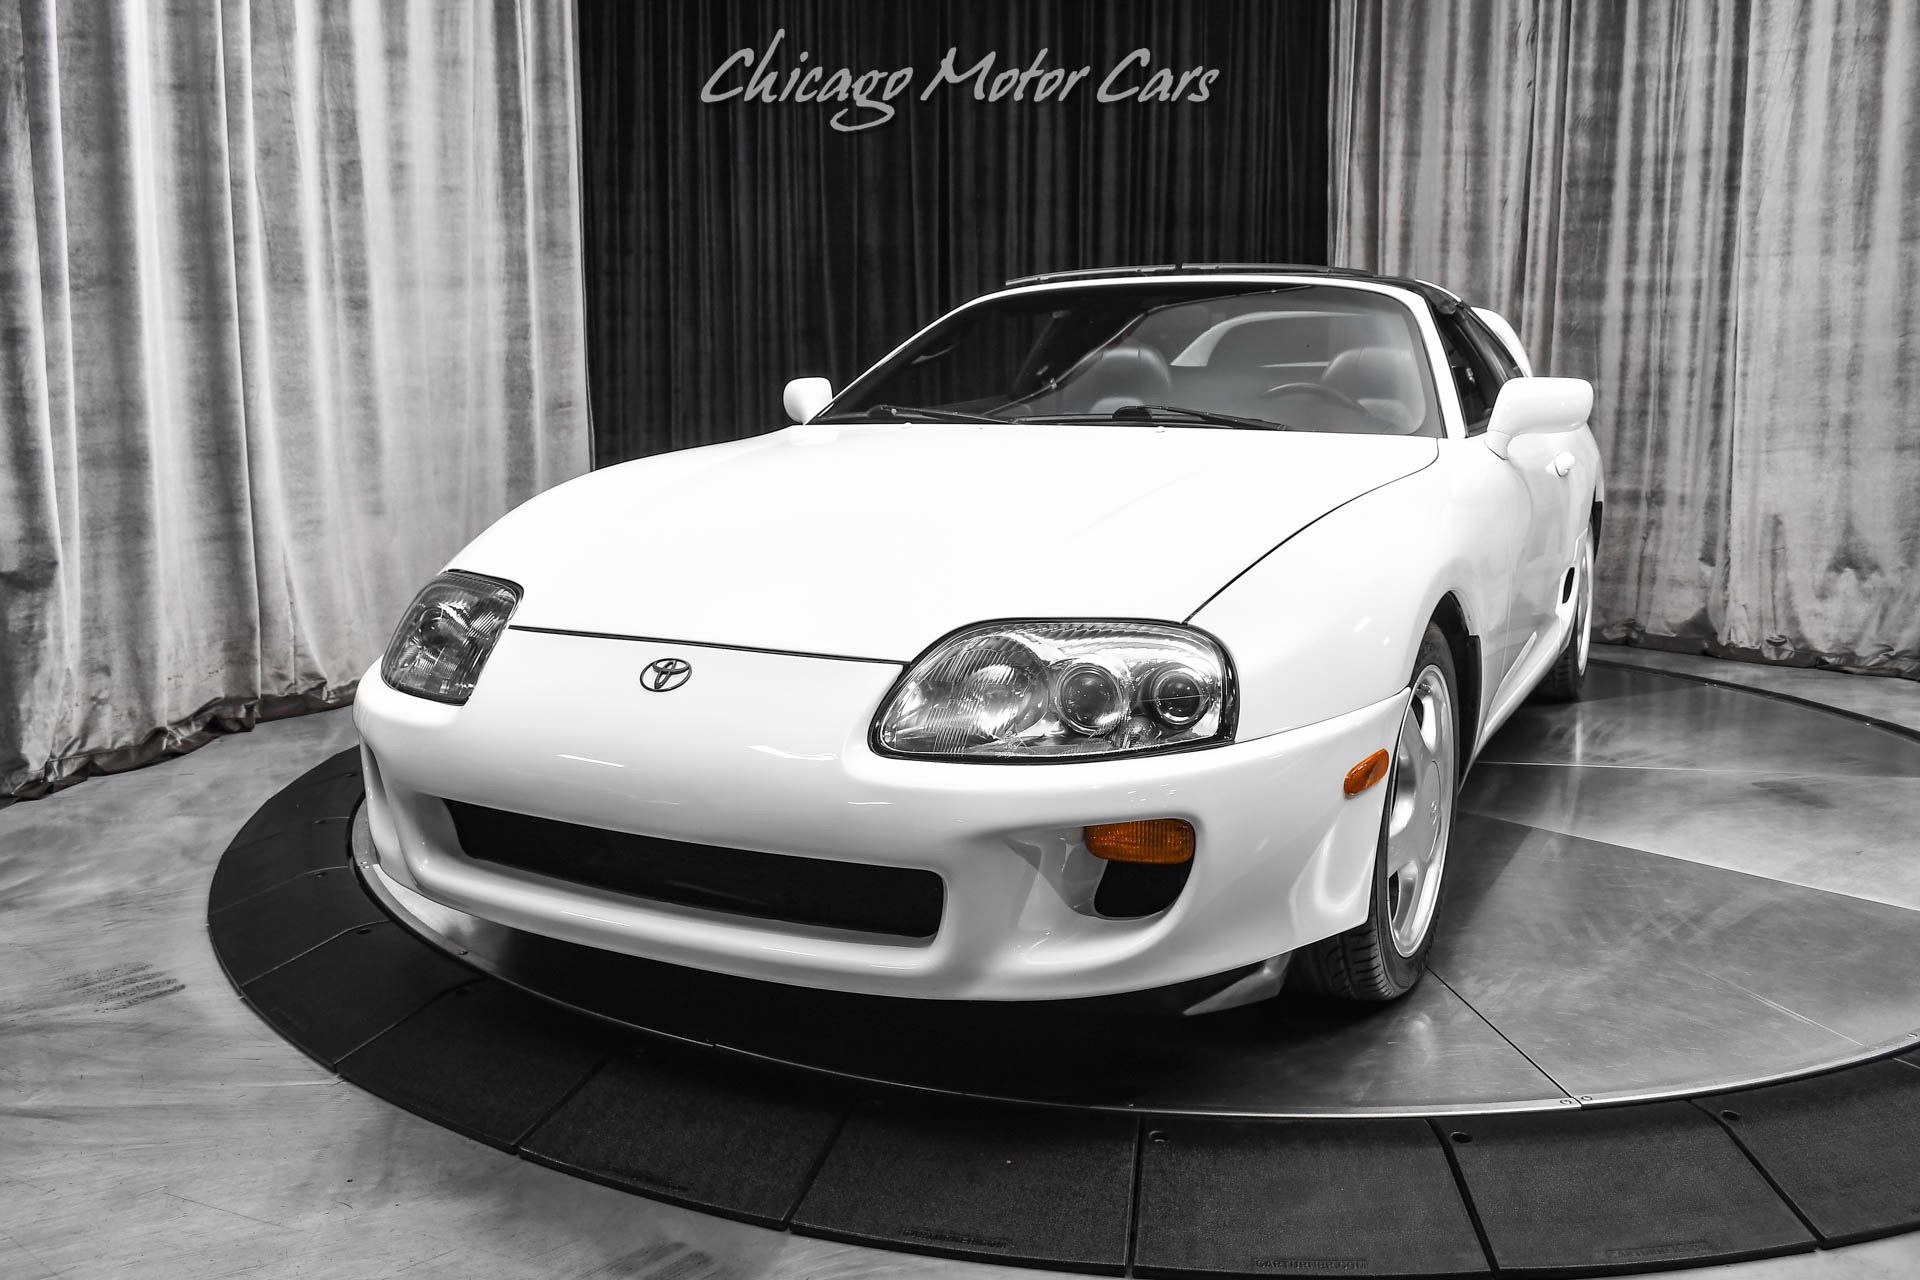 Used-1995-Toyota-Supra-Turbo-6-Speed-Manual-Bone-STOCK-GORGEOUS-Example-Collector-Quality-Car